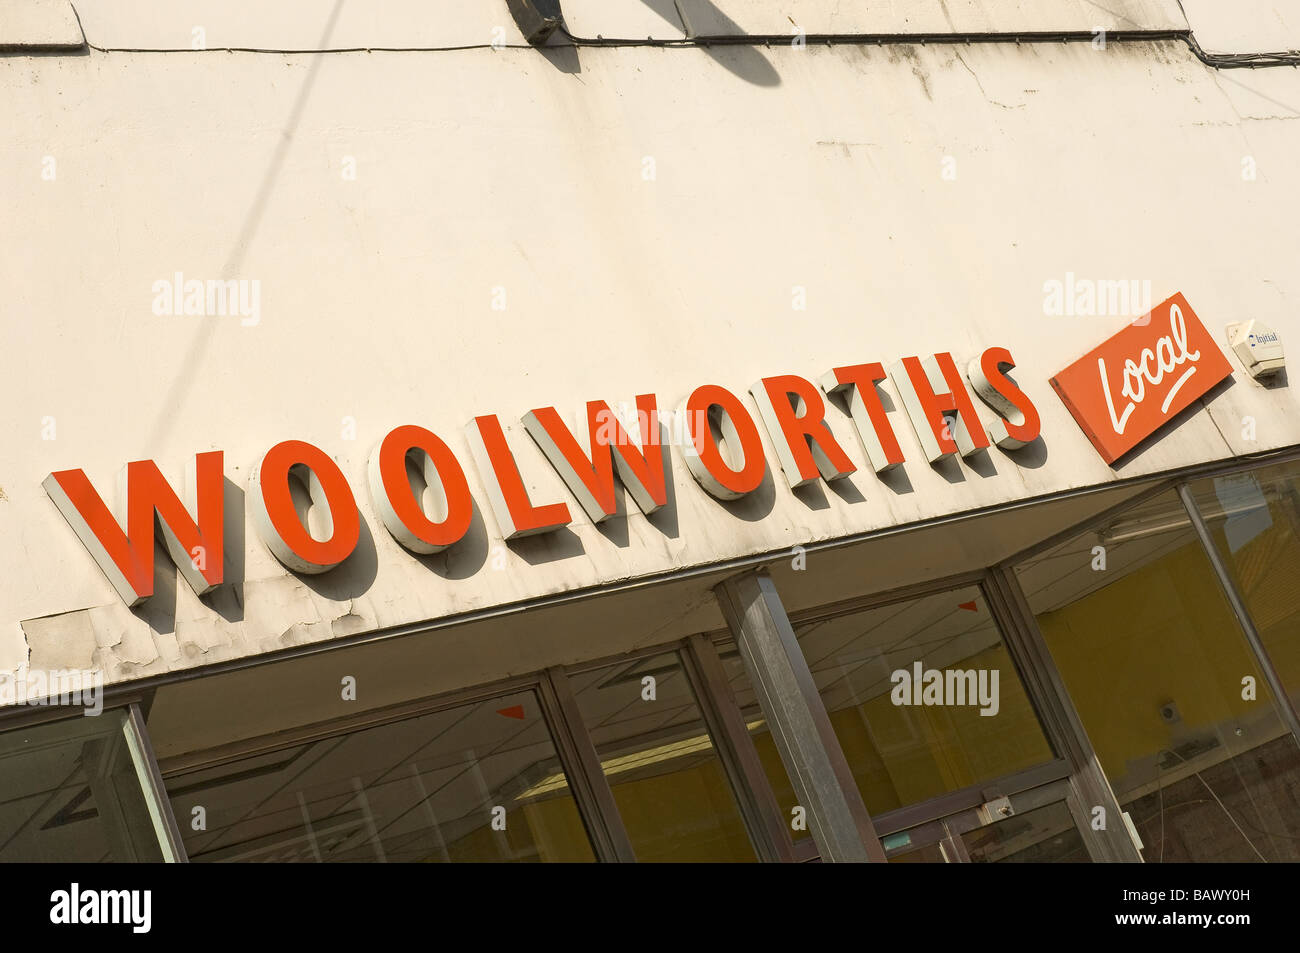 Woolworth Store Stock Photos & Woolworth Store Stock Images - Alamy1300 x 953